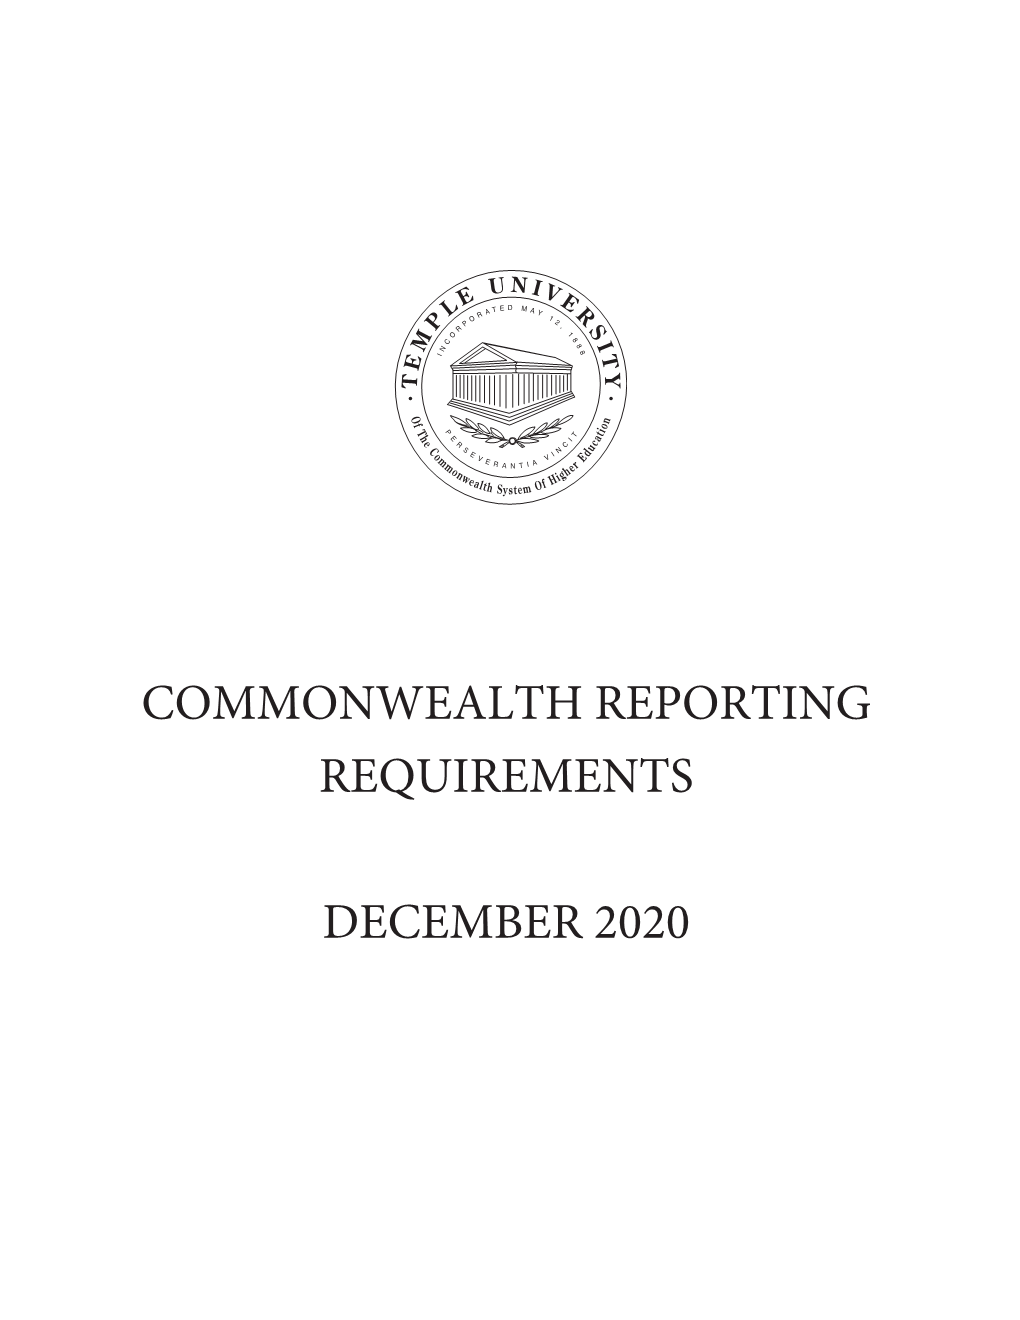 Commonwealth Reporting Requirements December 2020